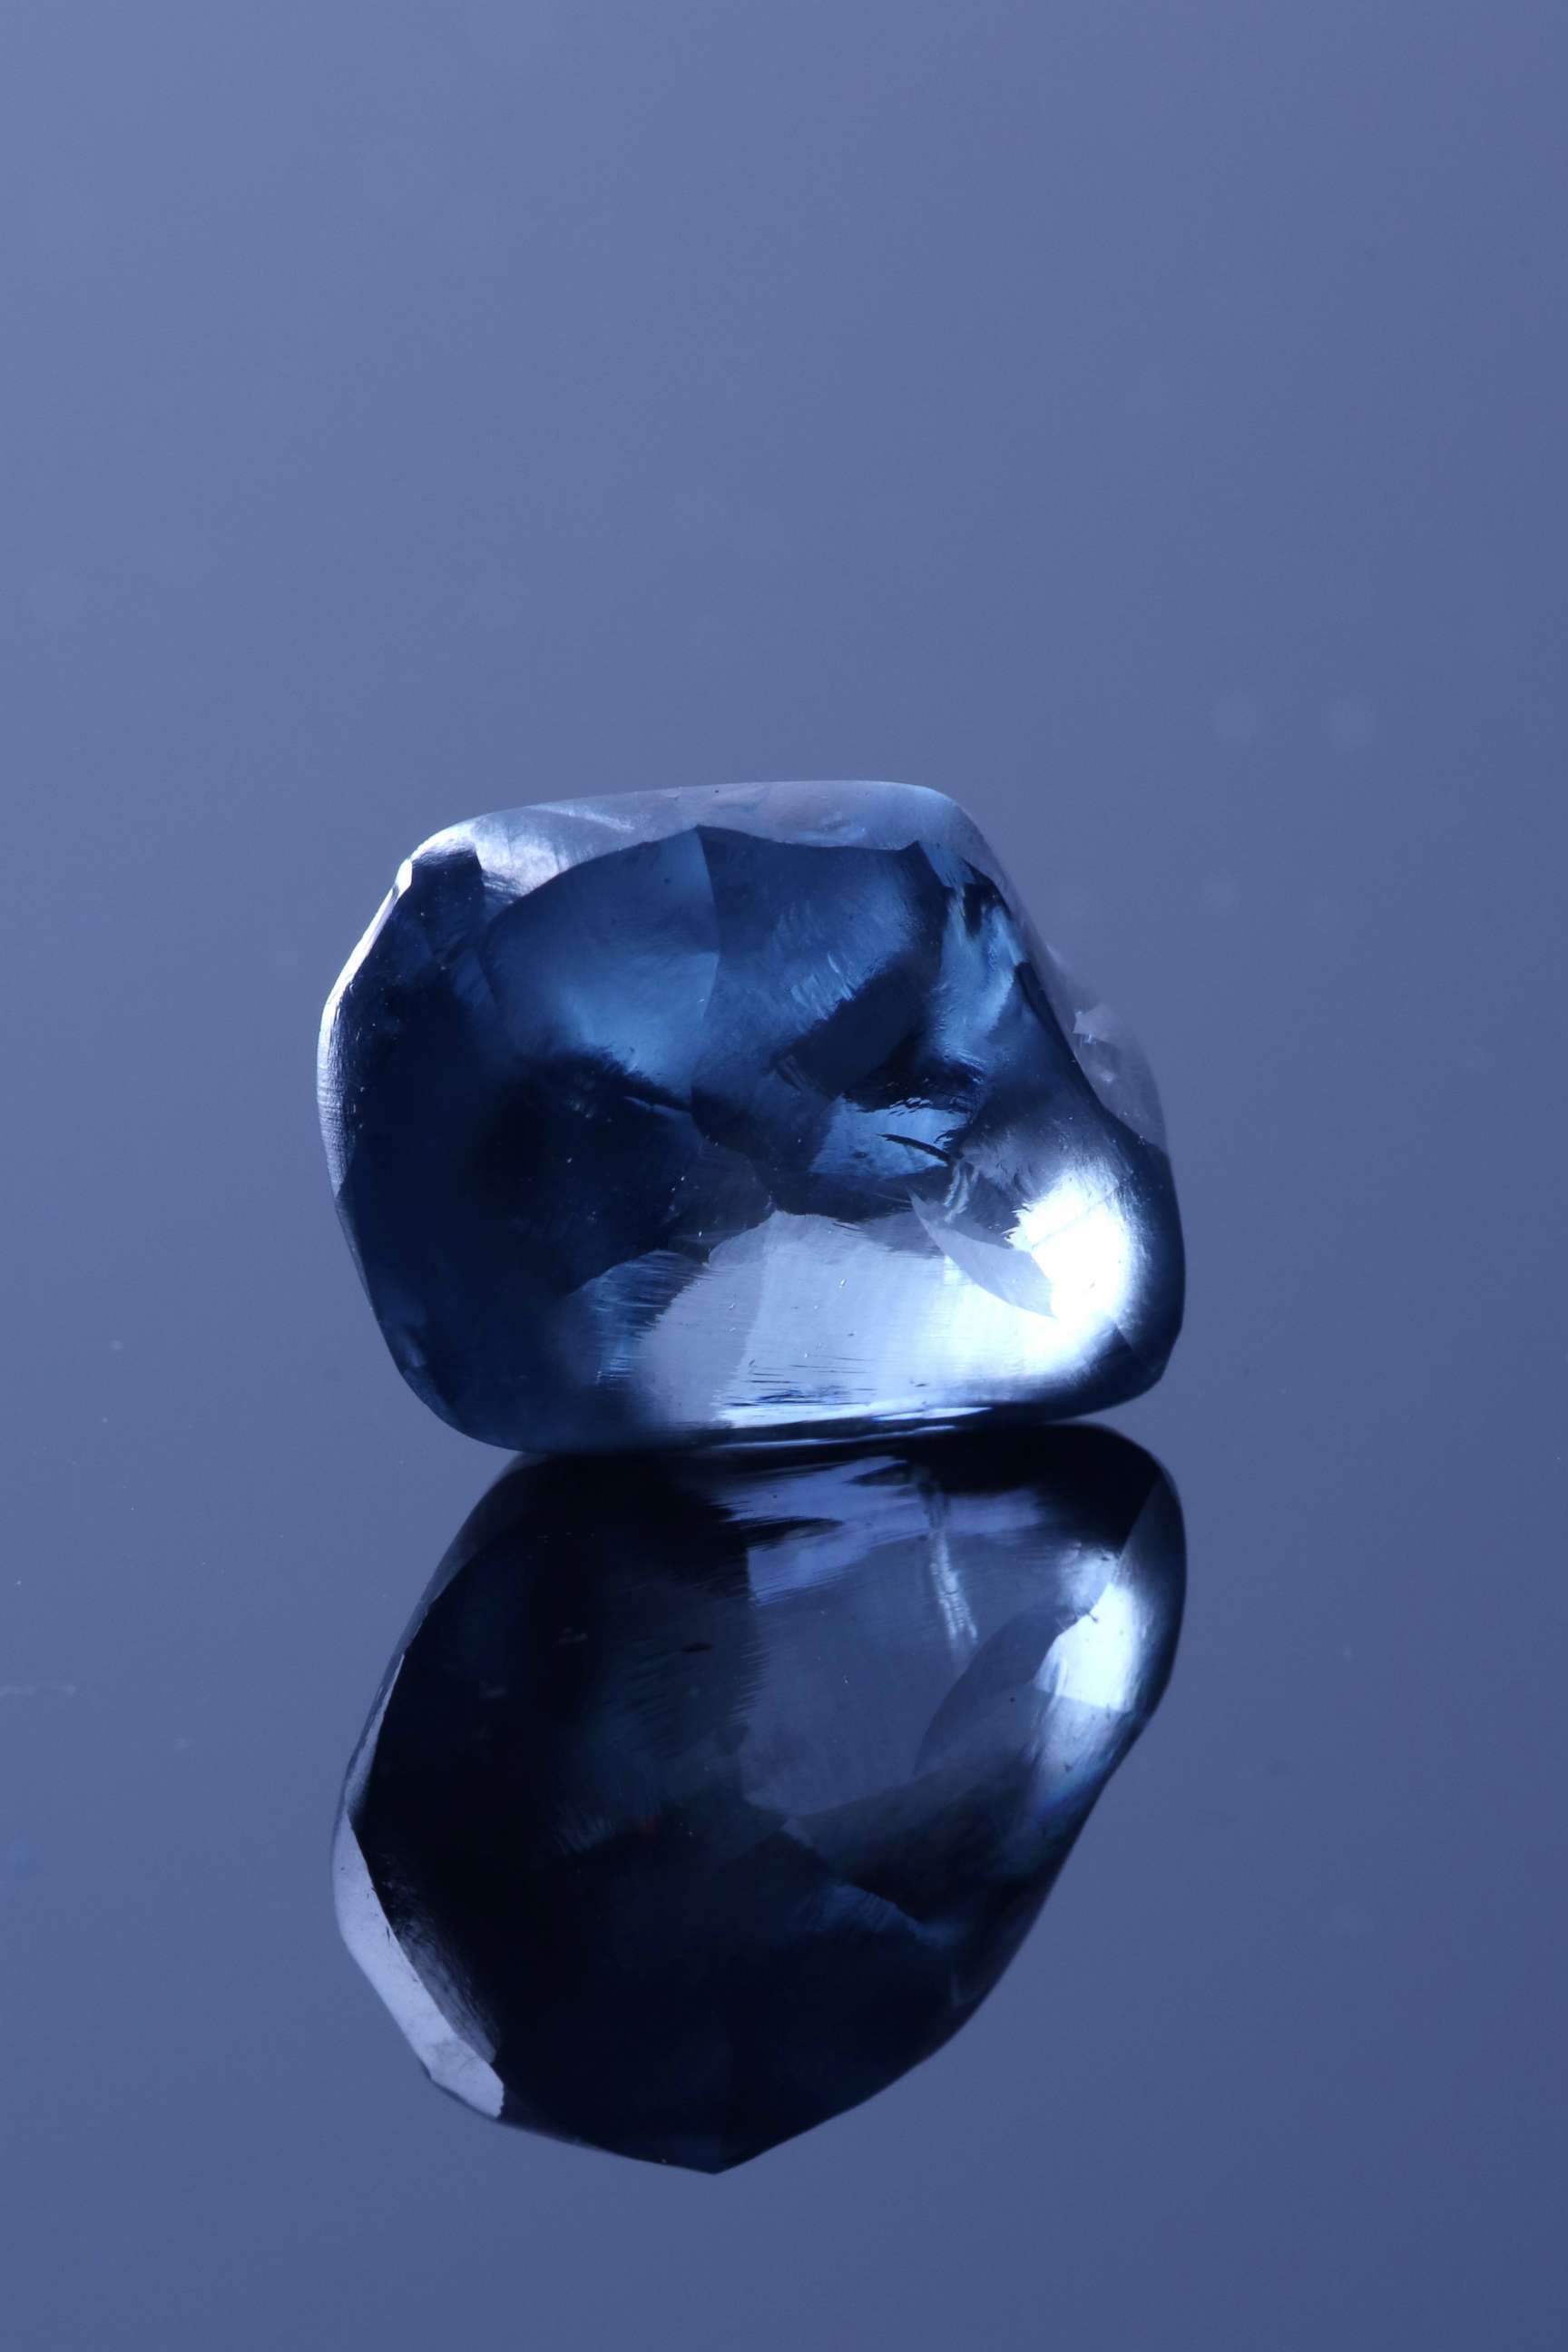 PHOTO: A rare blue diamond was unveiled in Botswana on April 17, 2019.